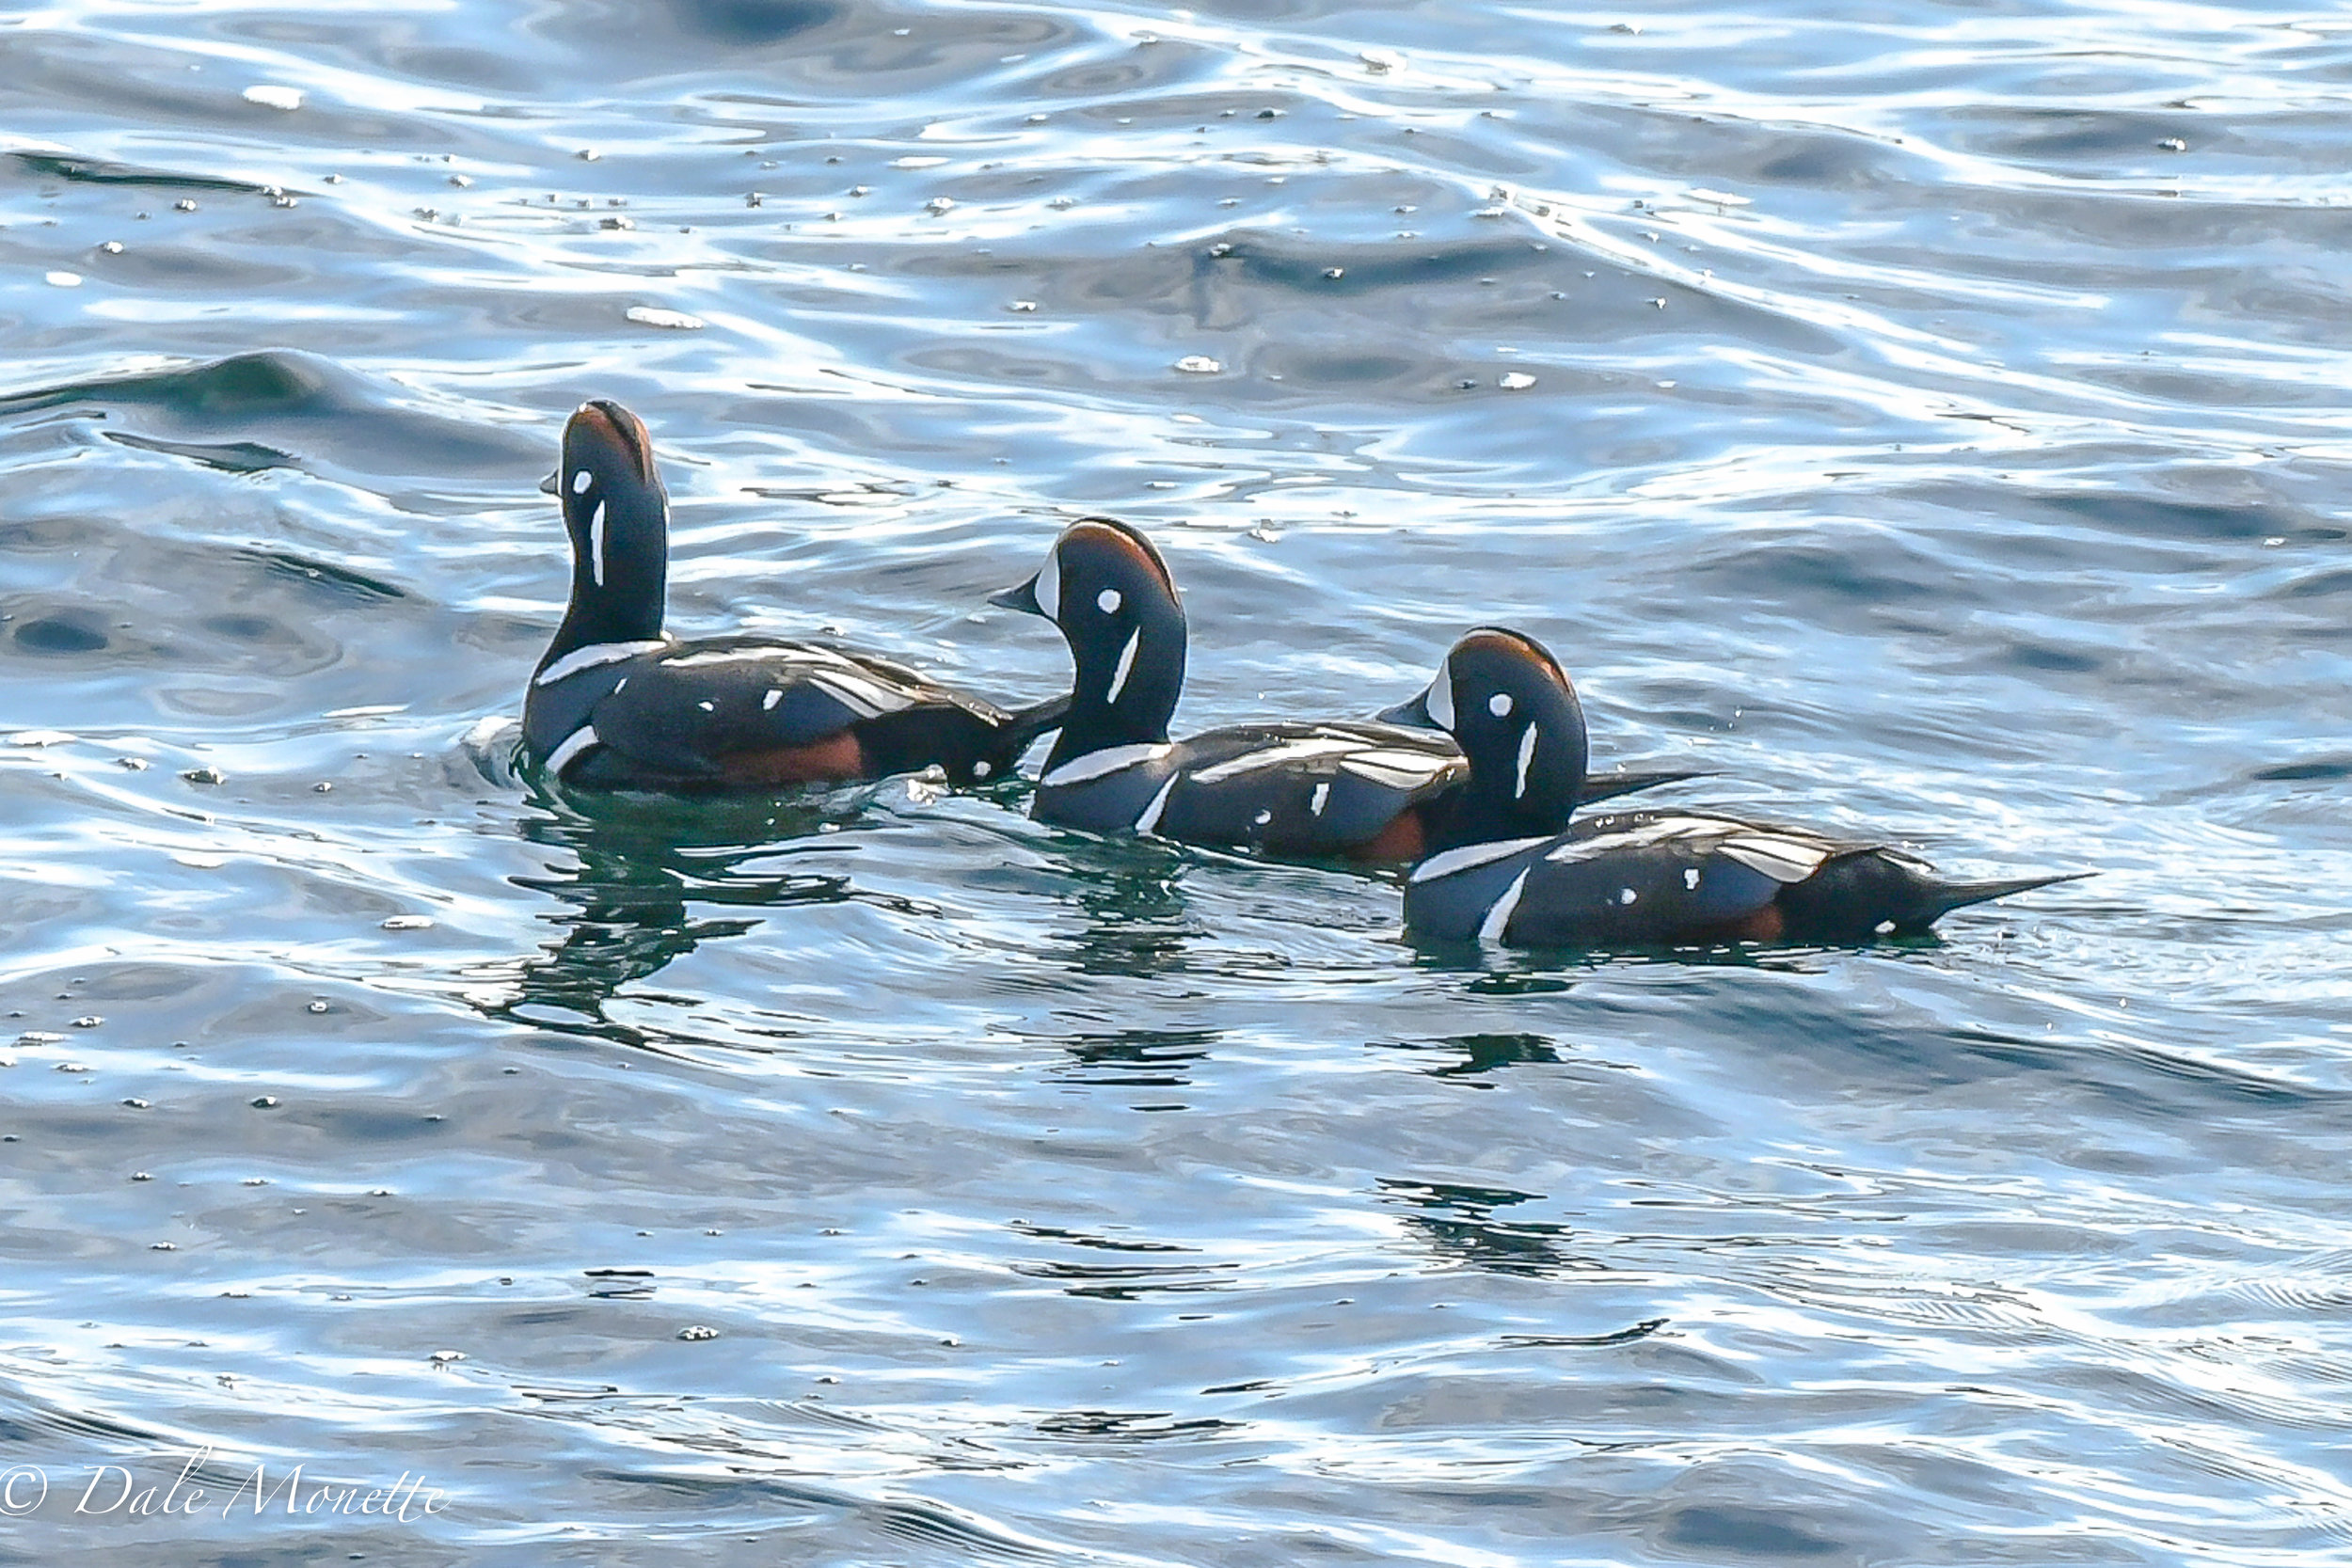   Last week off the coast of Maine I found these harlequin ducks.&nbsp; They are arctic circle ducks that spend their winters in New England along the rocky shores feeding in the tide crashes in the rocks.  